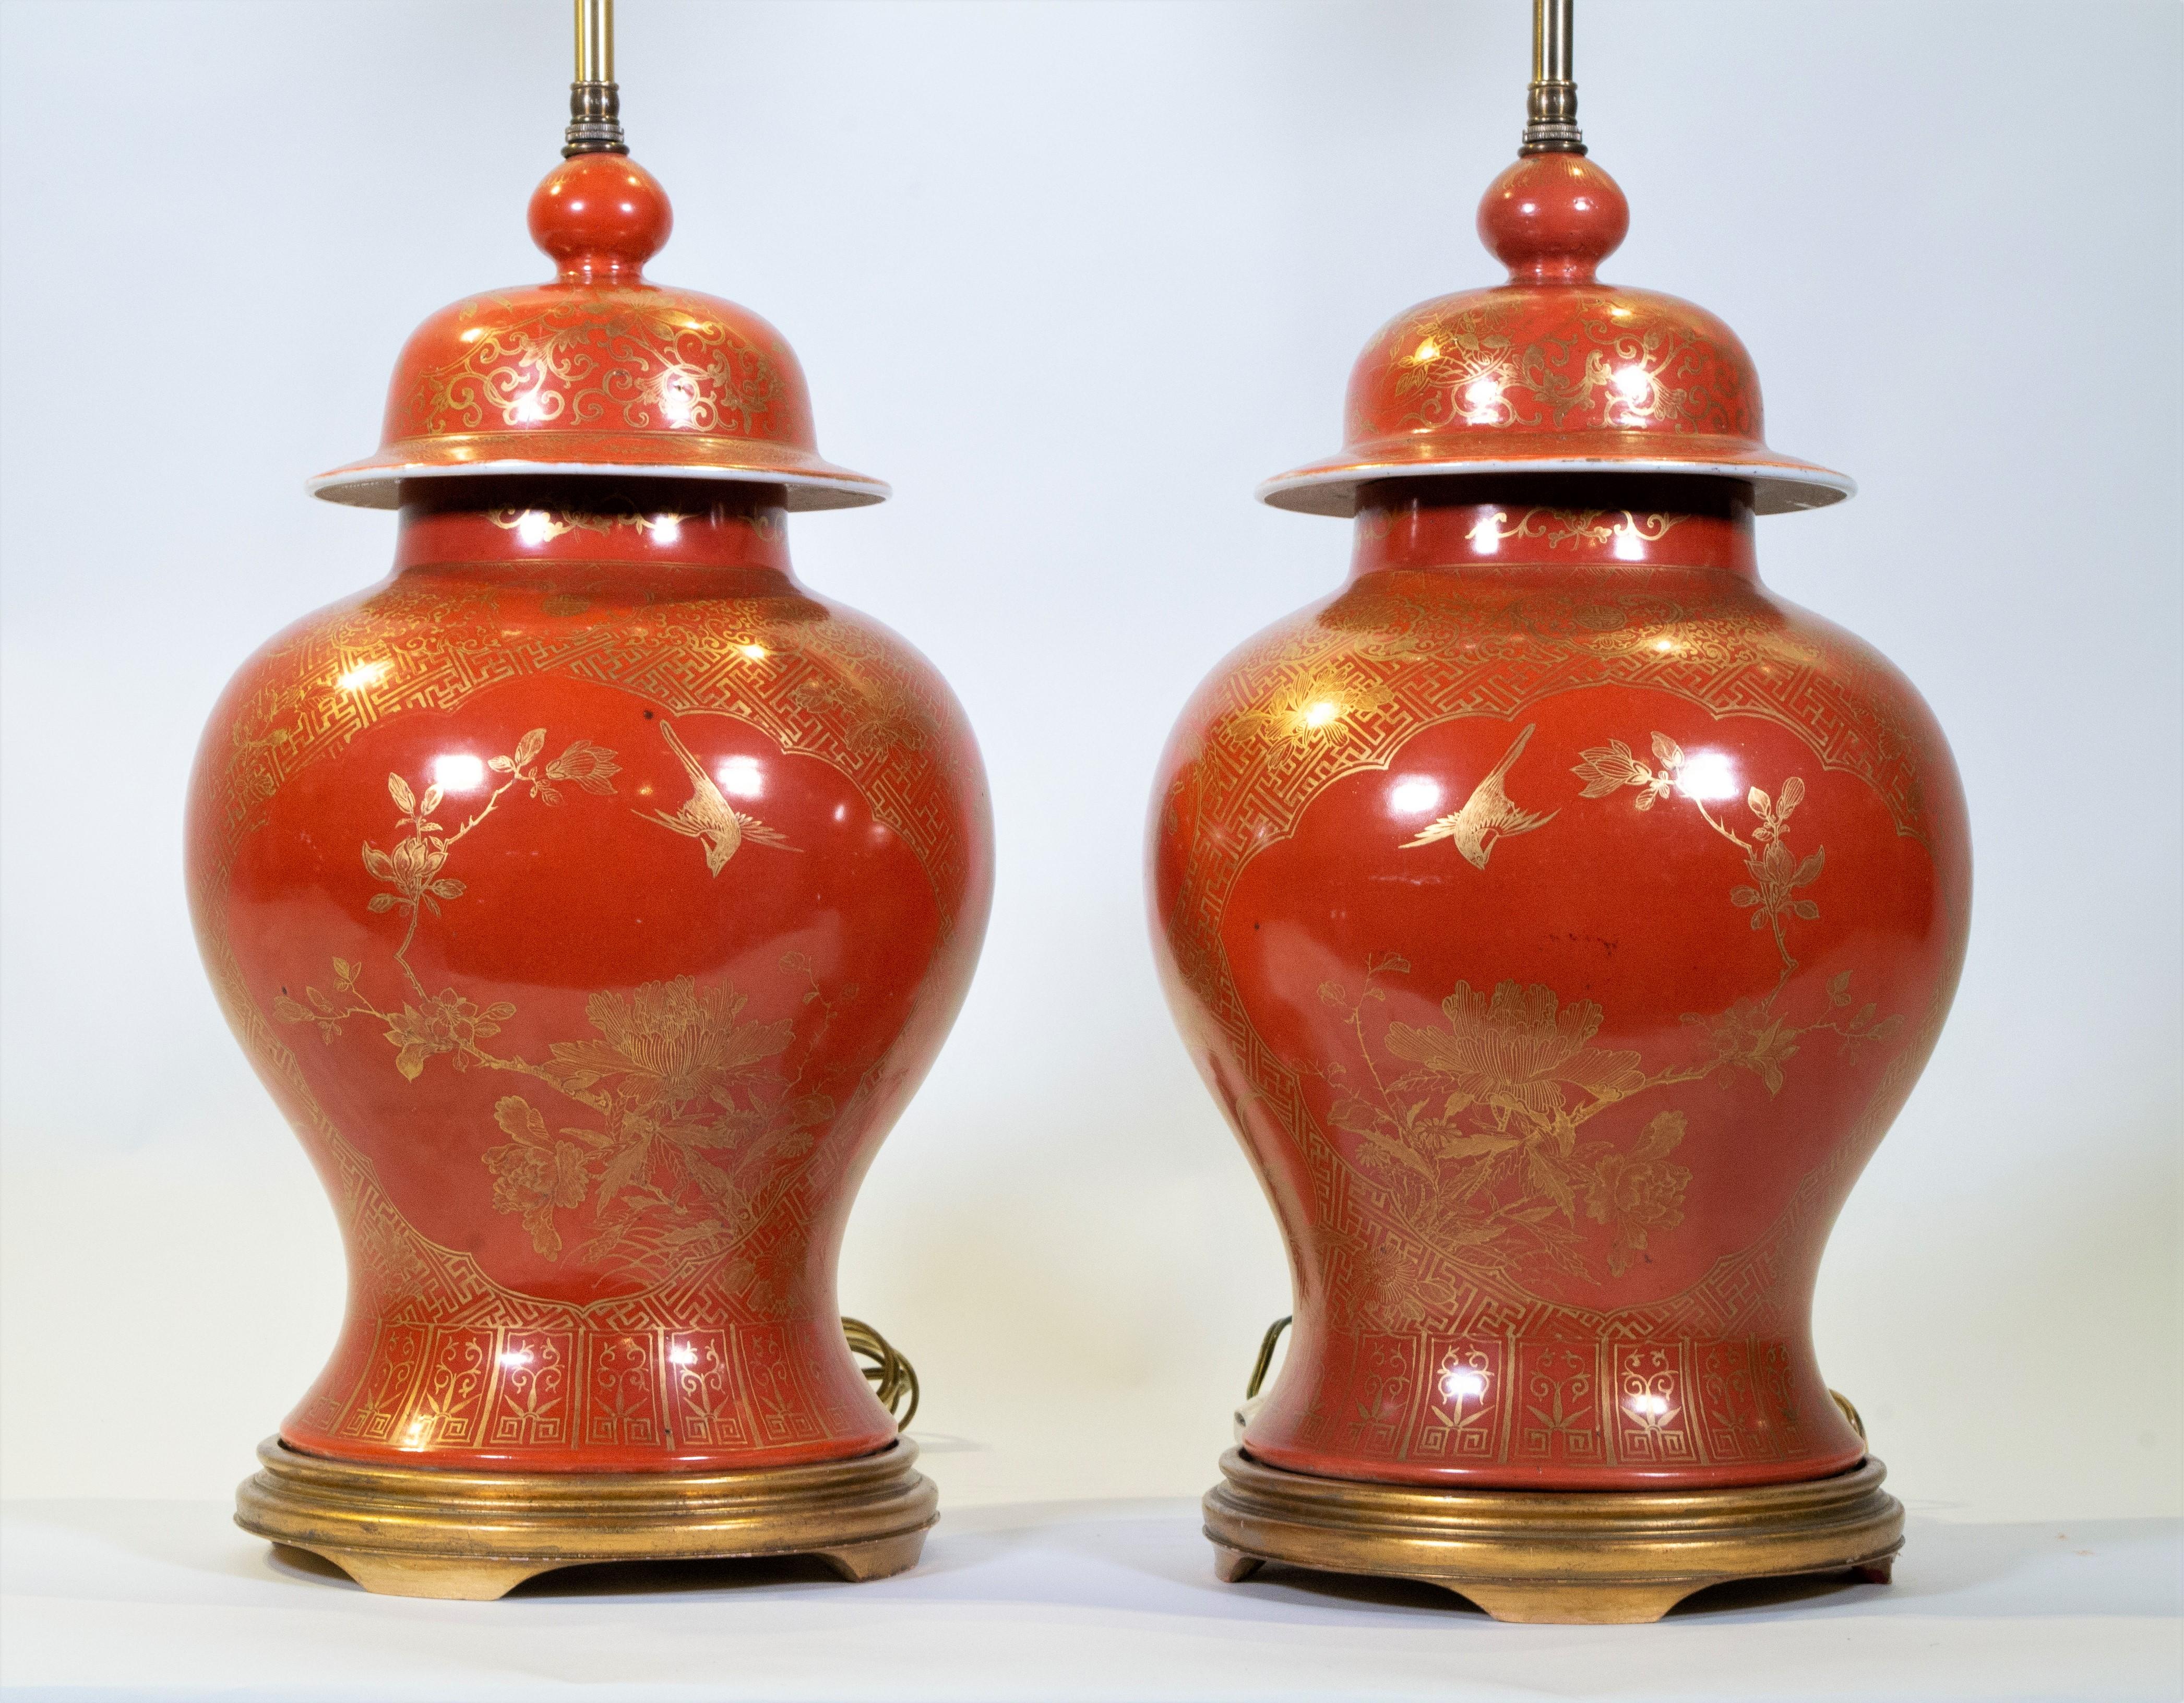 Porcelain Fine pair Antique Chinese Export Orange Ground & 24K Gilt Vases Turned to Lamps For Sale